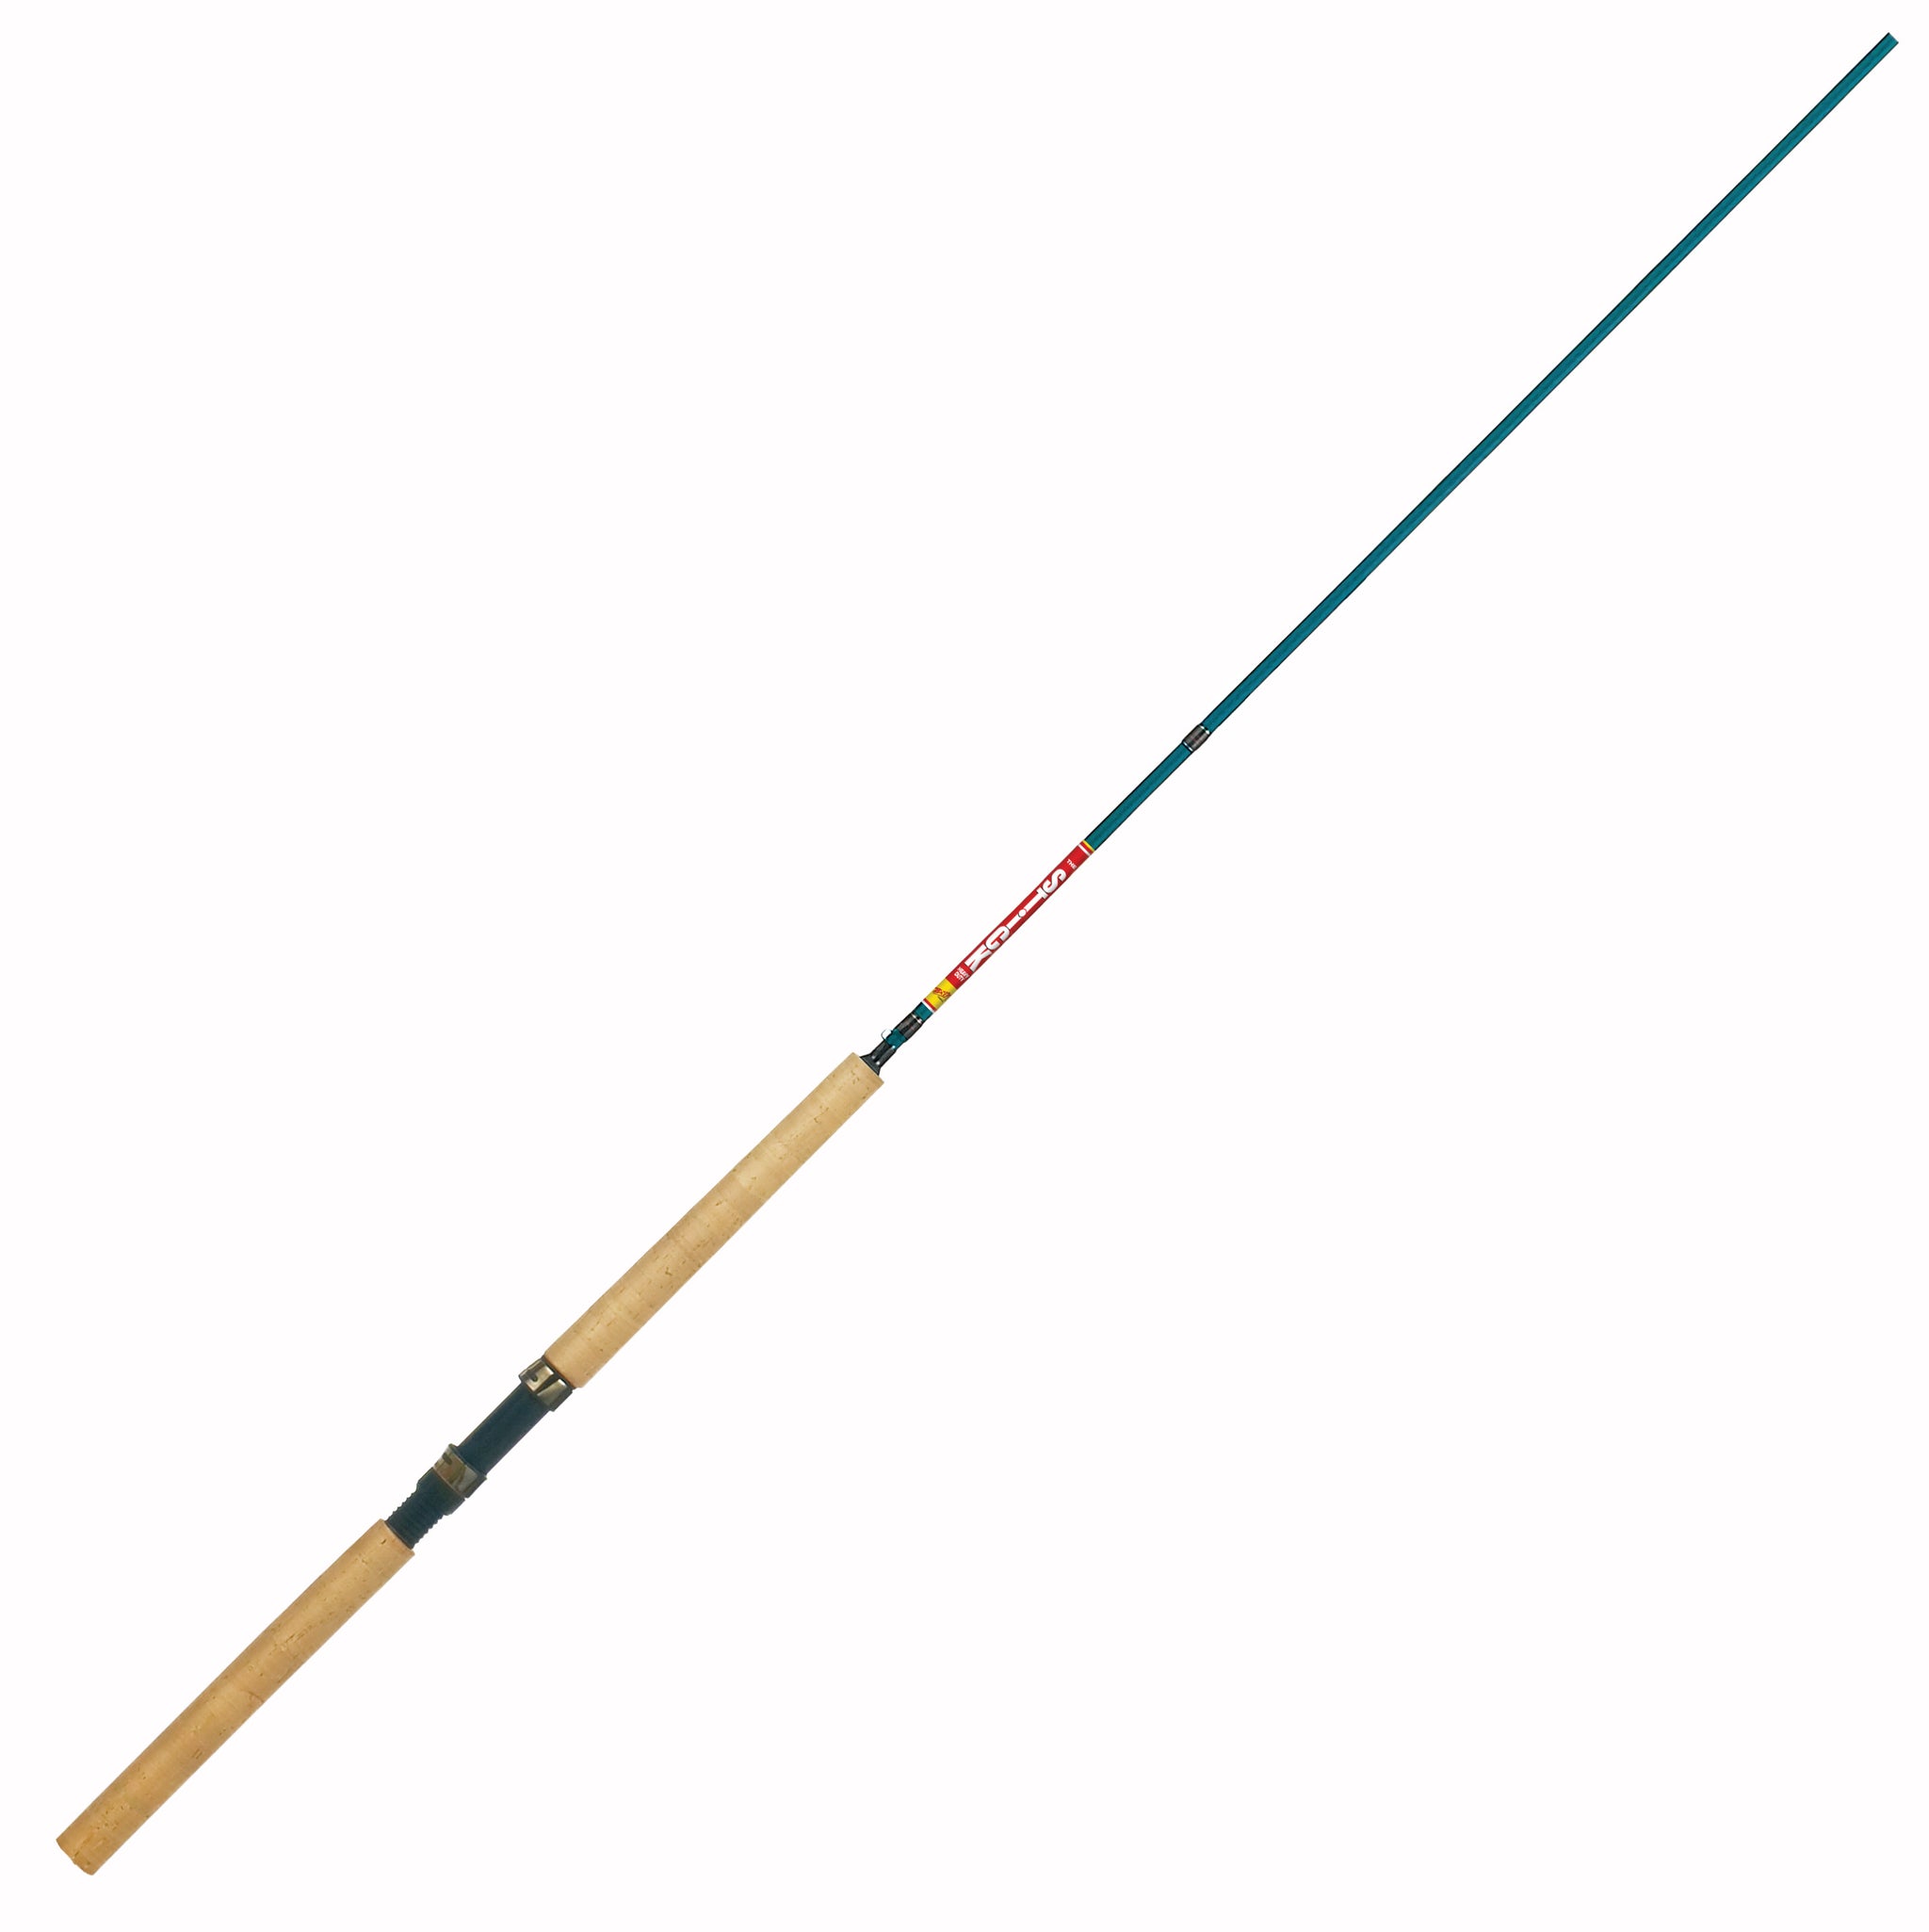 Rod Action Explained  Fishing rod, Crappie fishing, Fish